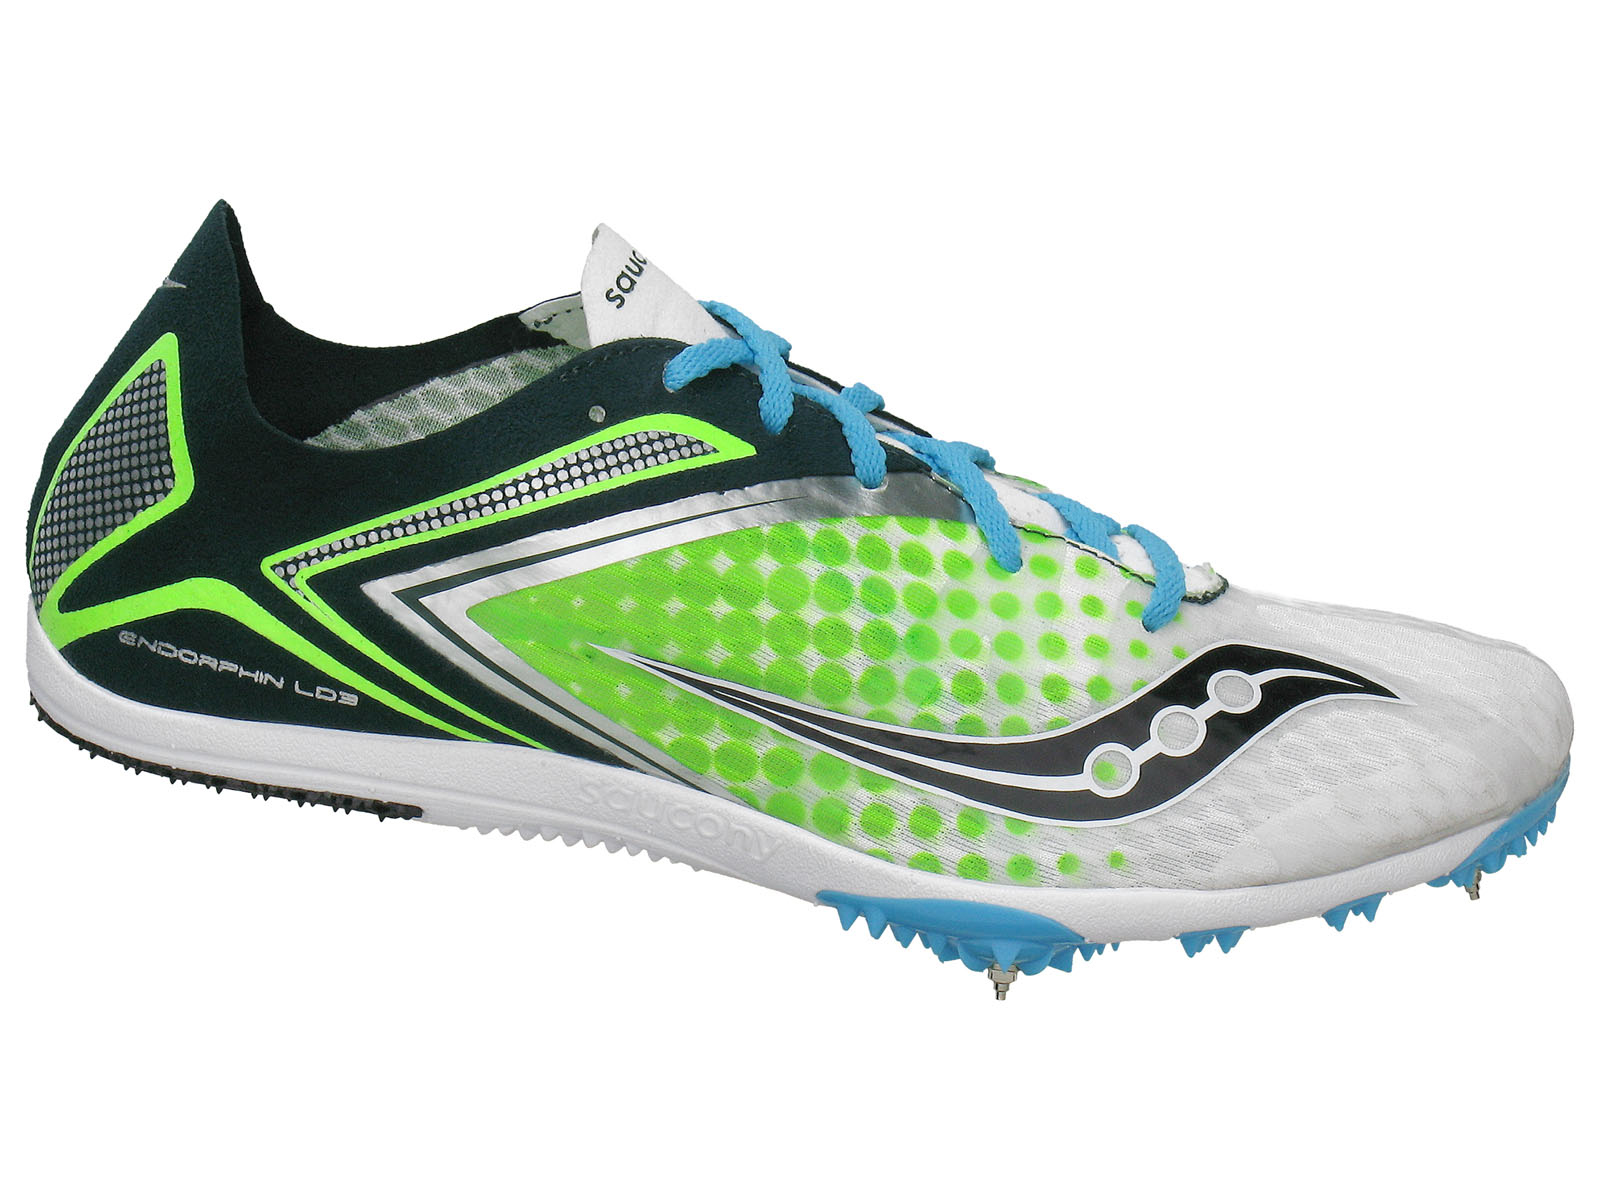 Saucony spikes reviewed